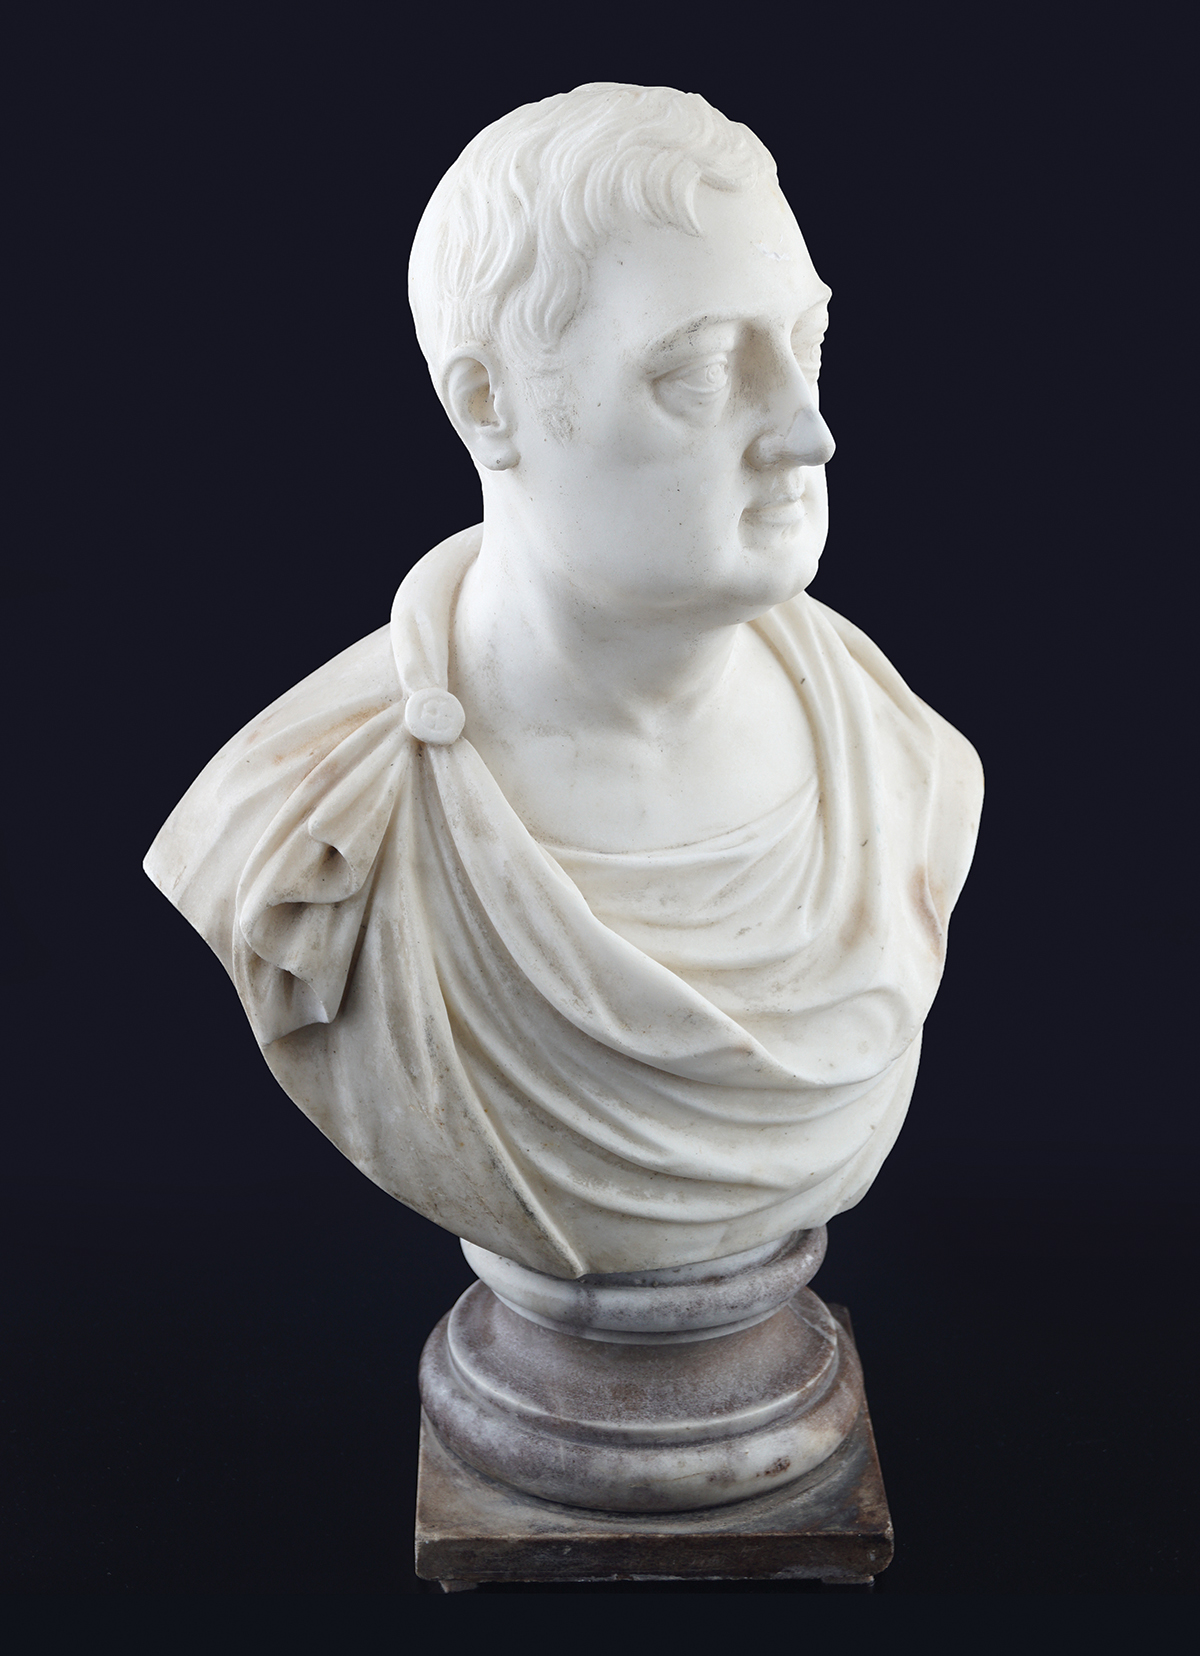 18TH-CENTURY MARBLE BUST